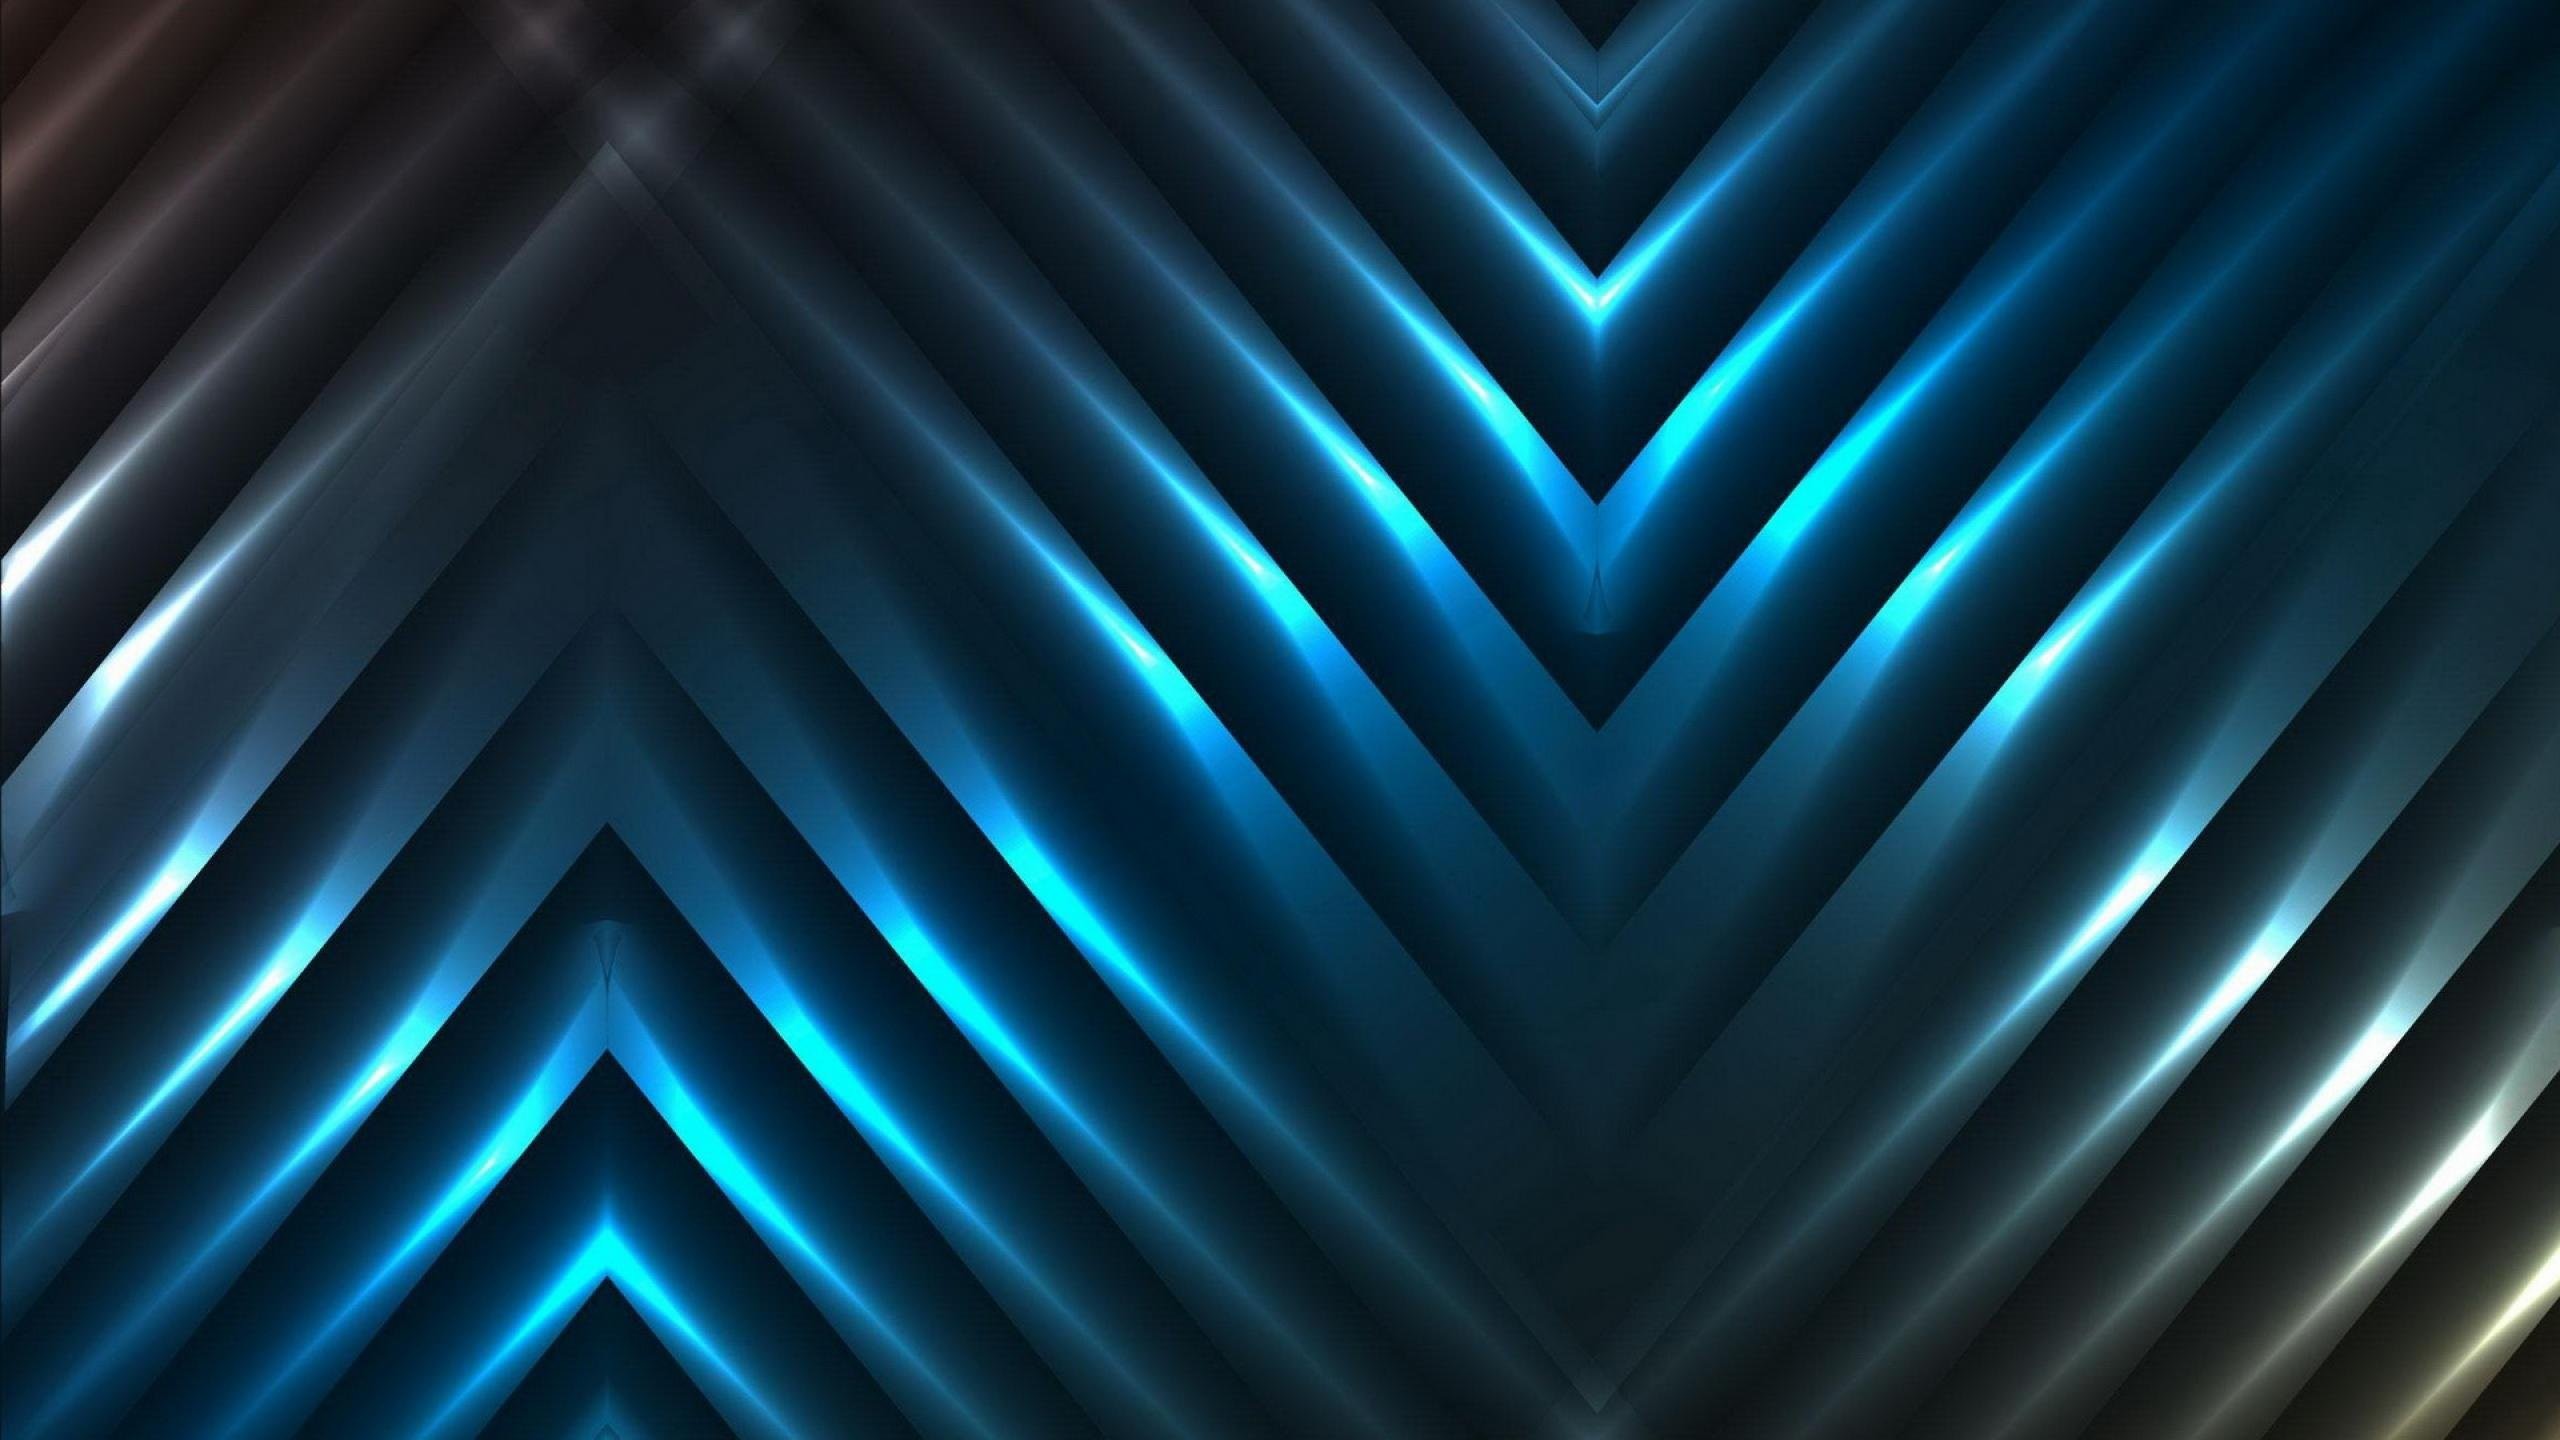 2560x1440 Wallpaper With Texture